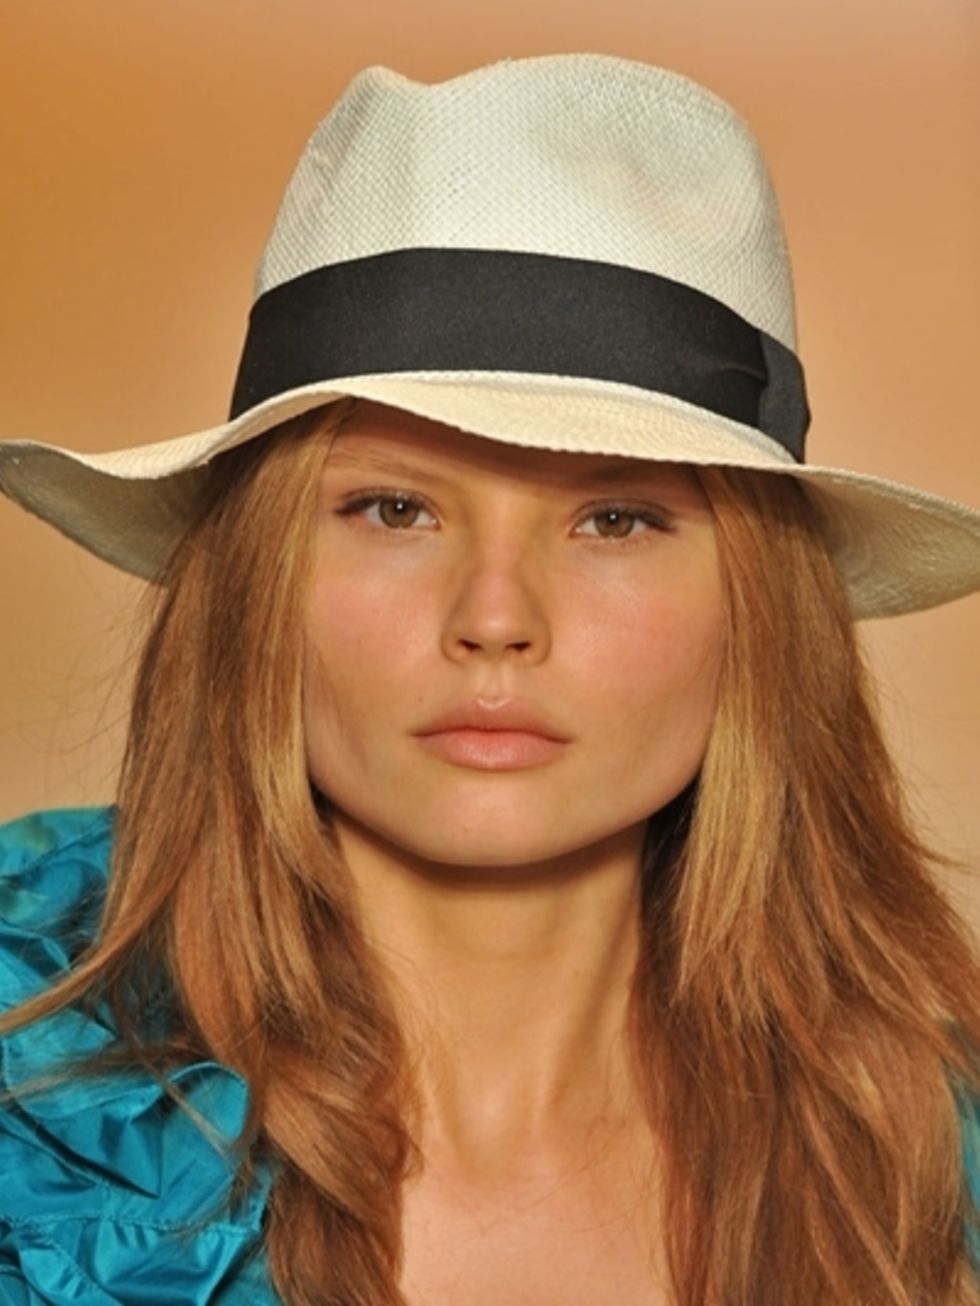 Nose, Lip, Mouth, Brown, Hat, Hairstyle, Skin, Chin, Headgear, Fashion accessory, 